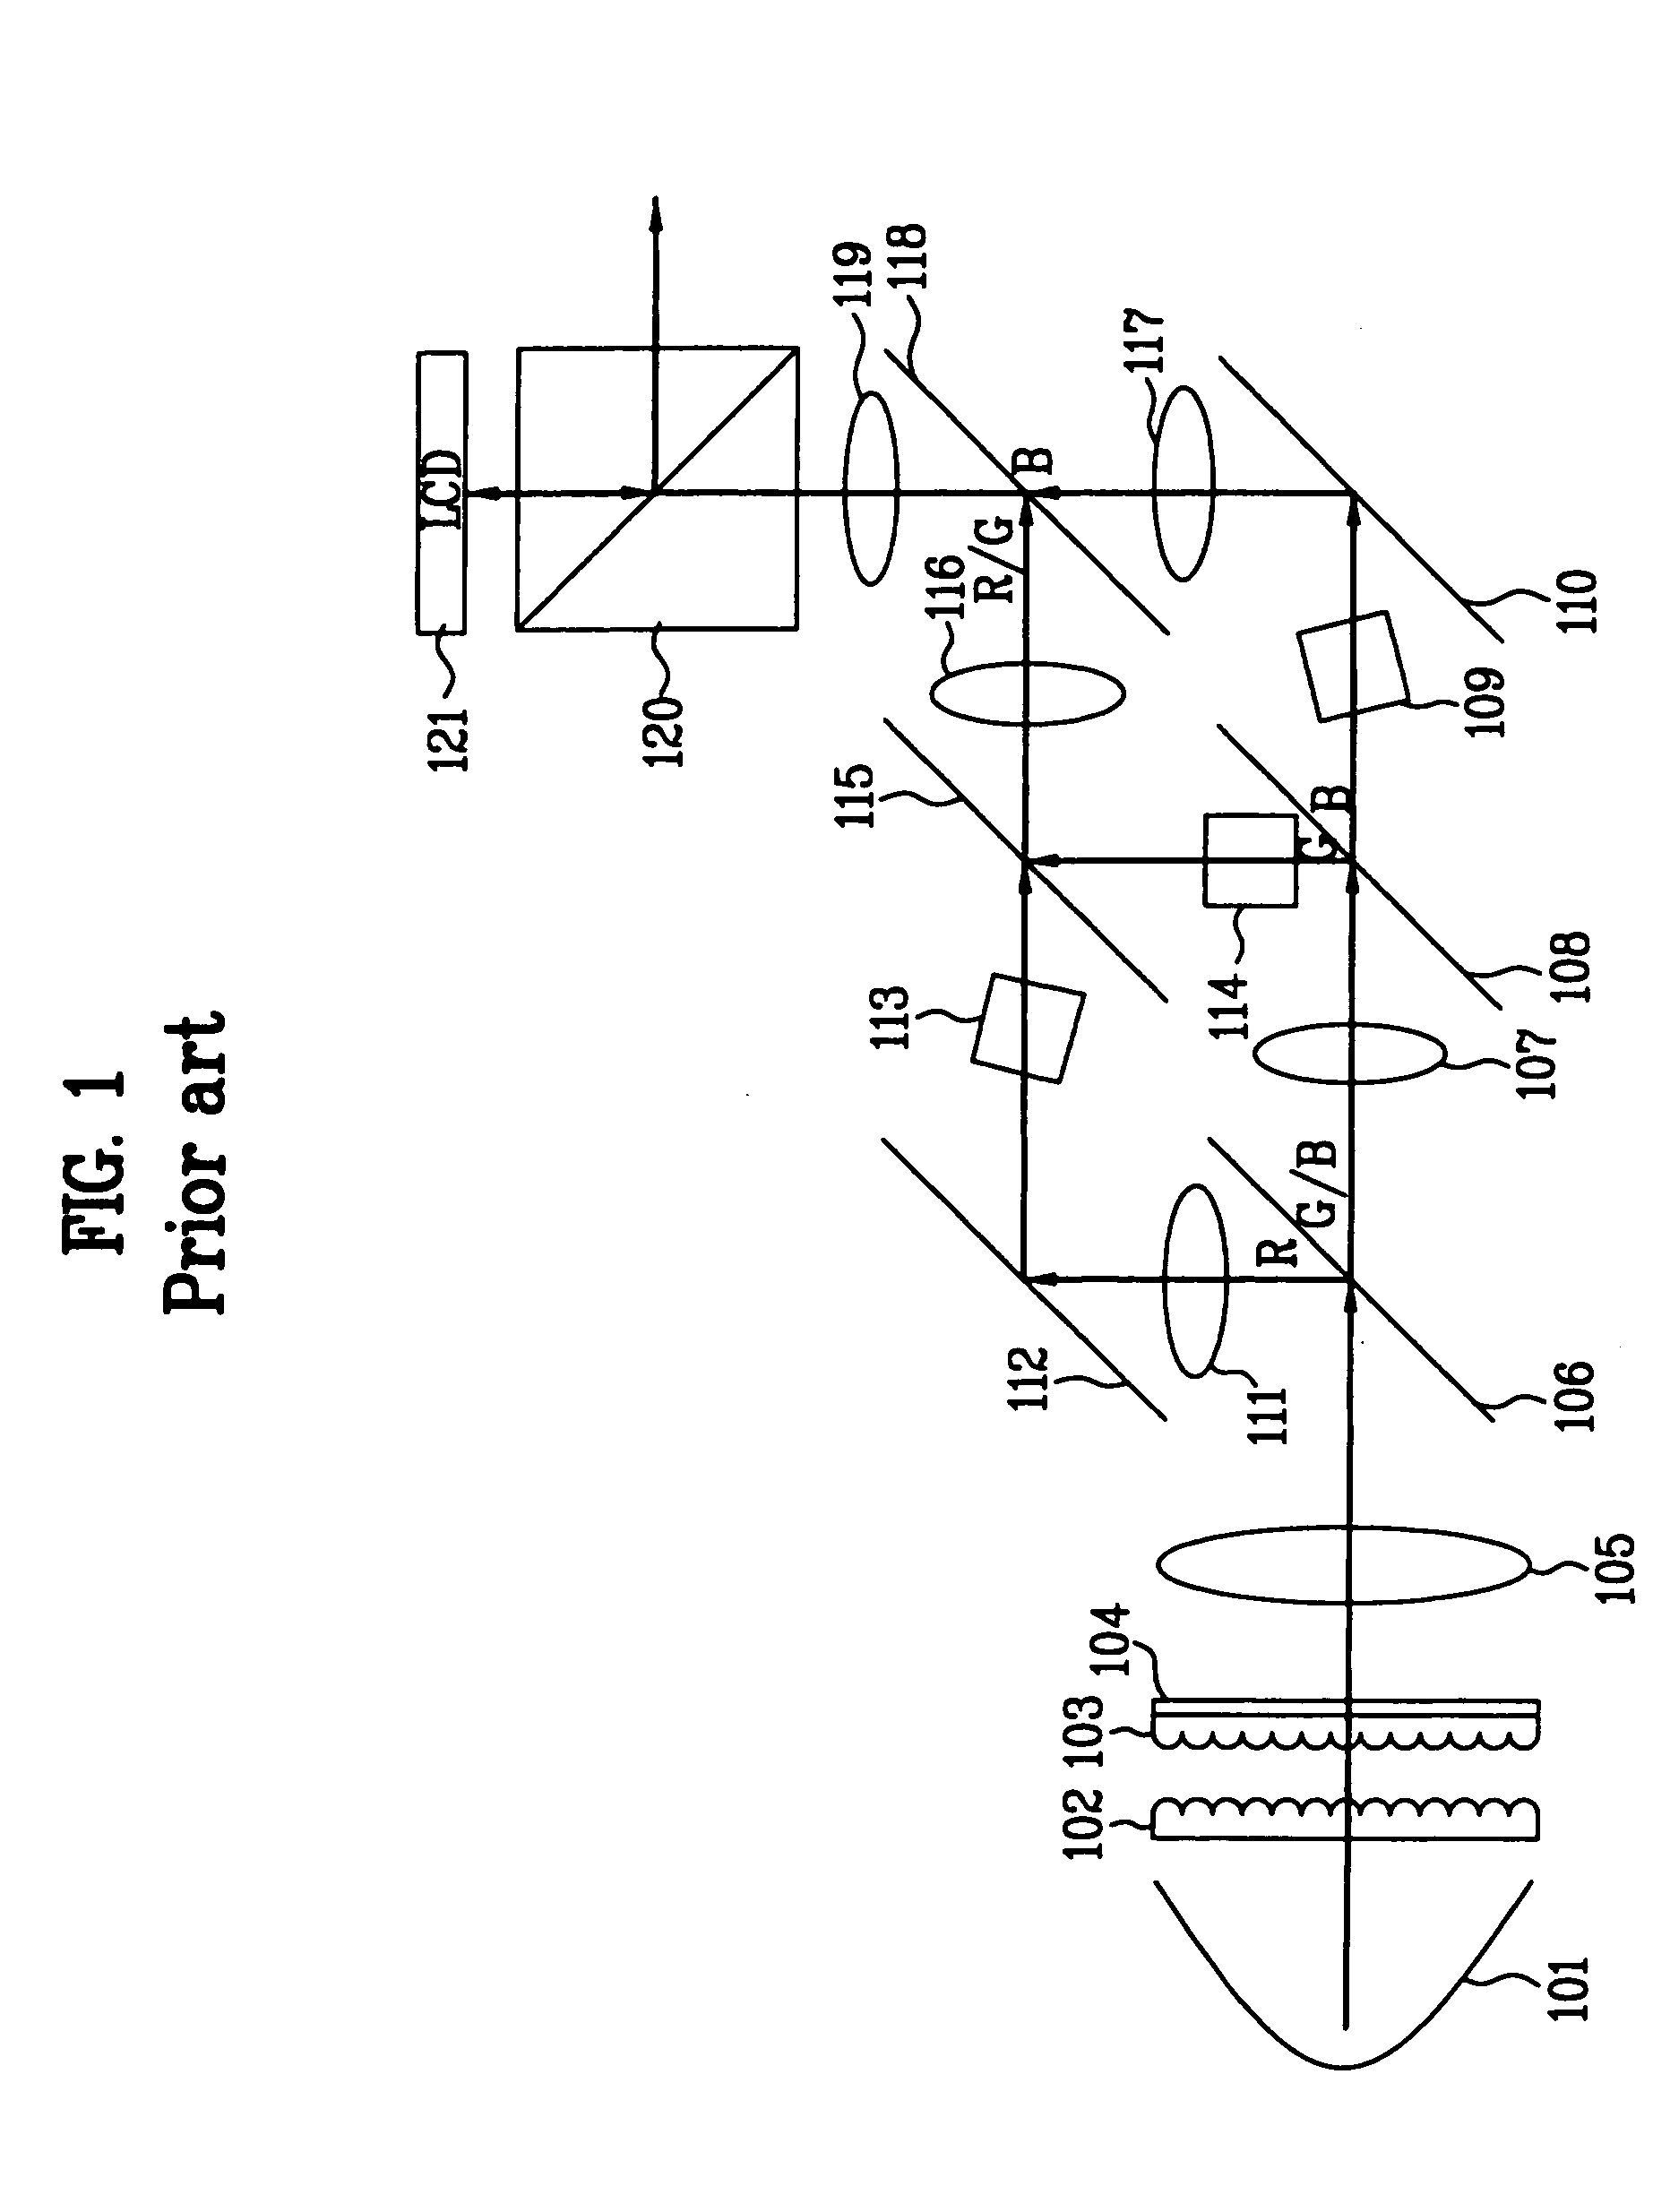 Single panel illumination system and projection display apparatus using the same